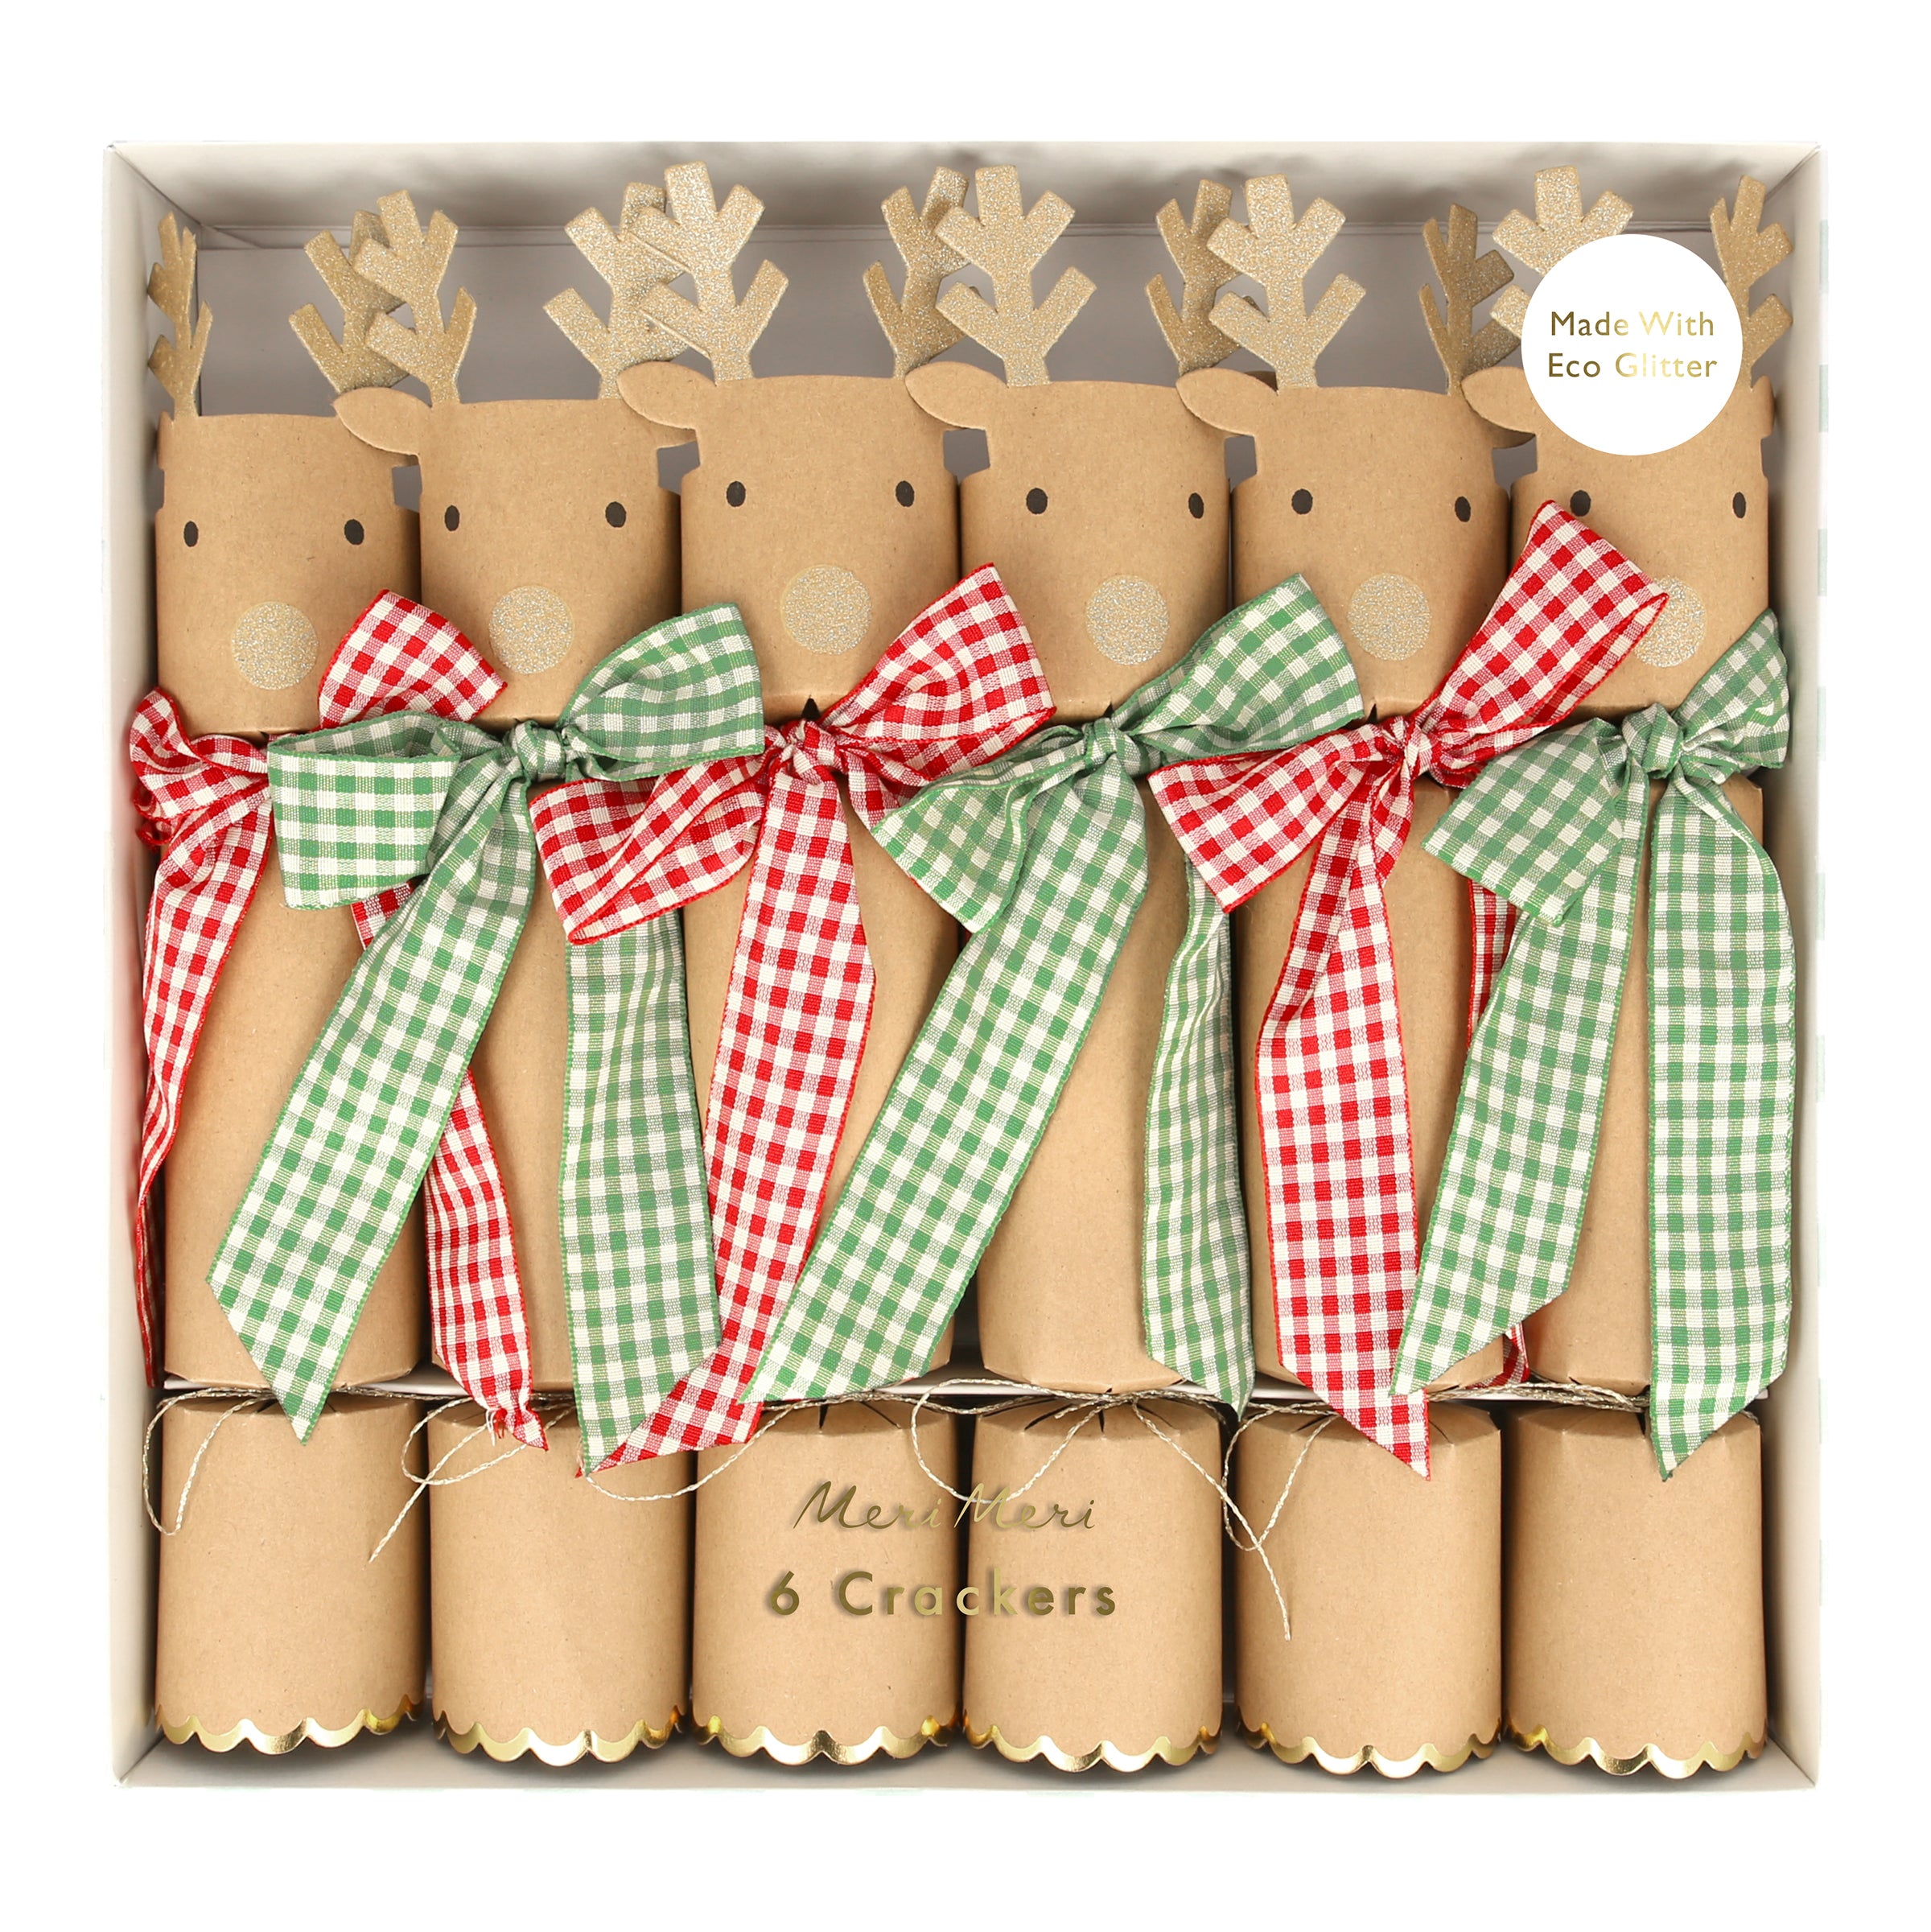 If you're looking for traditional Christmas dining table decor then our Reindeer crackers with gingham ribbons are a great choice.